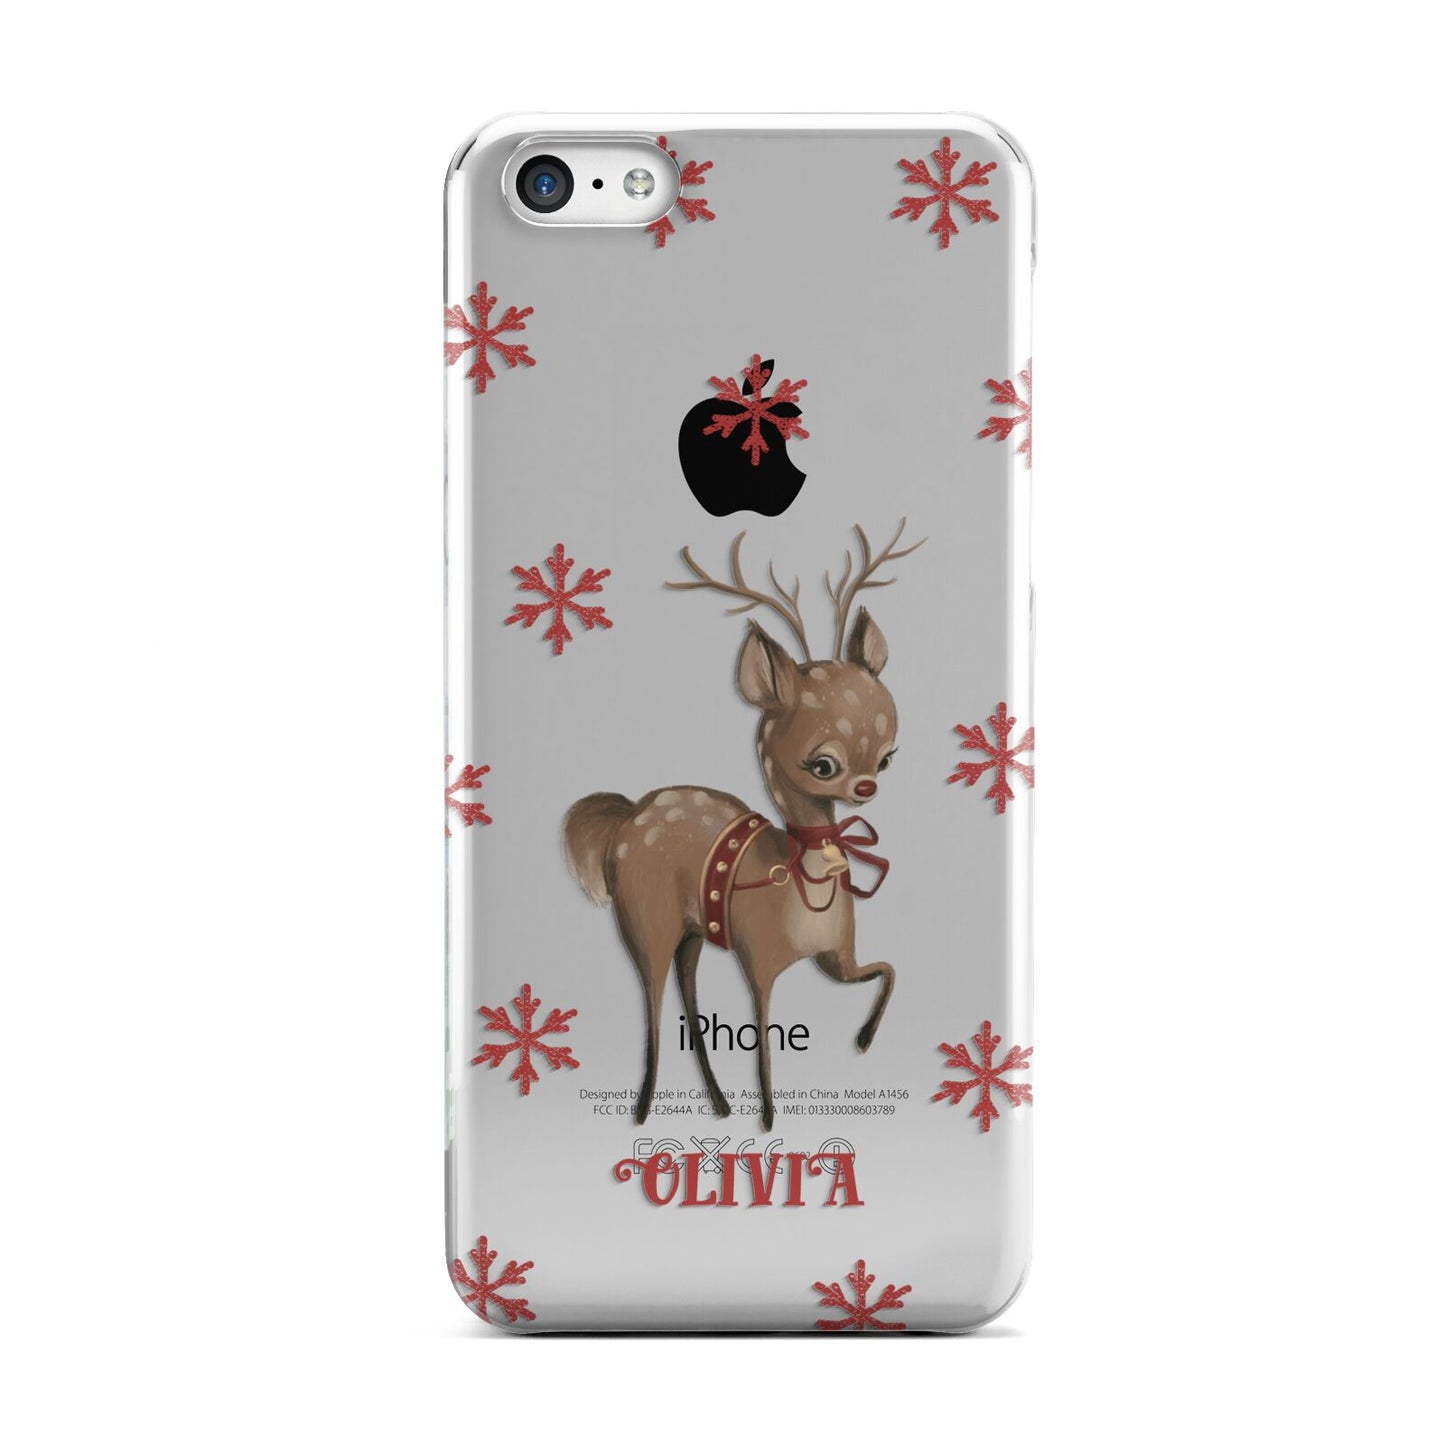 Rudolph Delivery Apple iPhone 5c Case